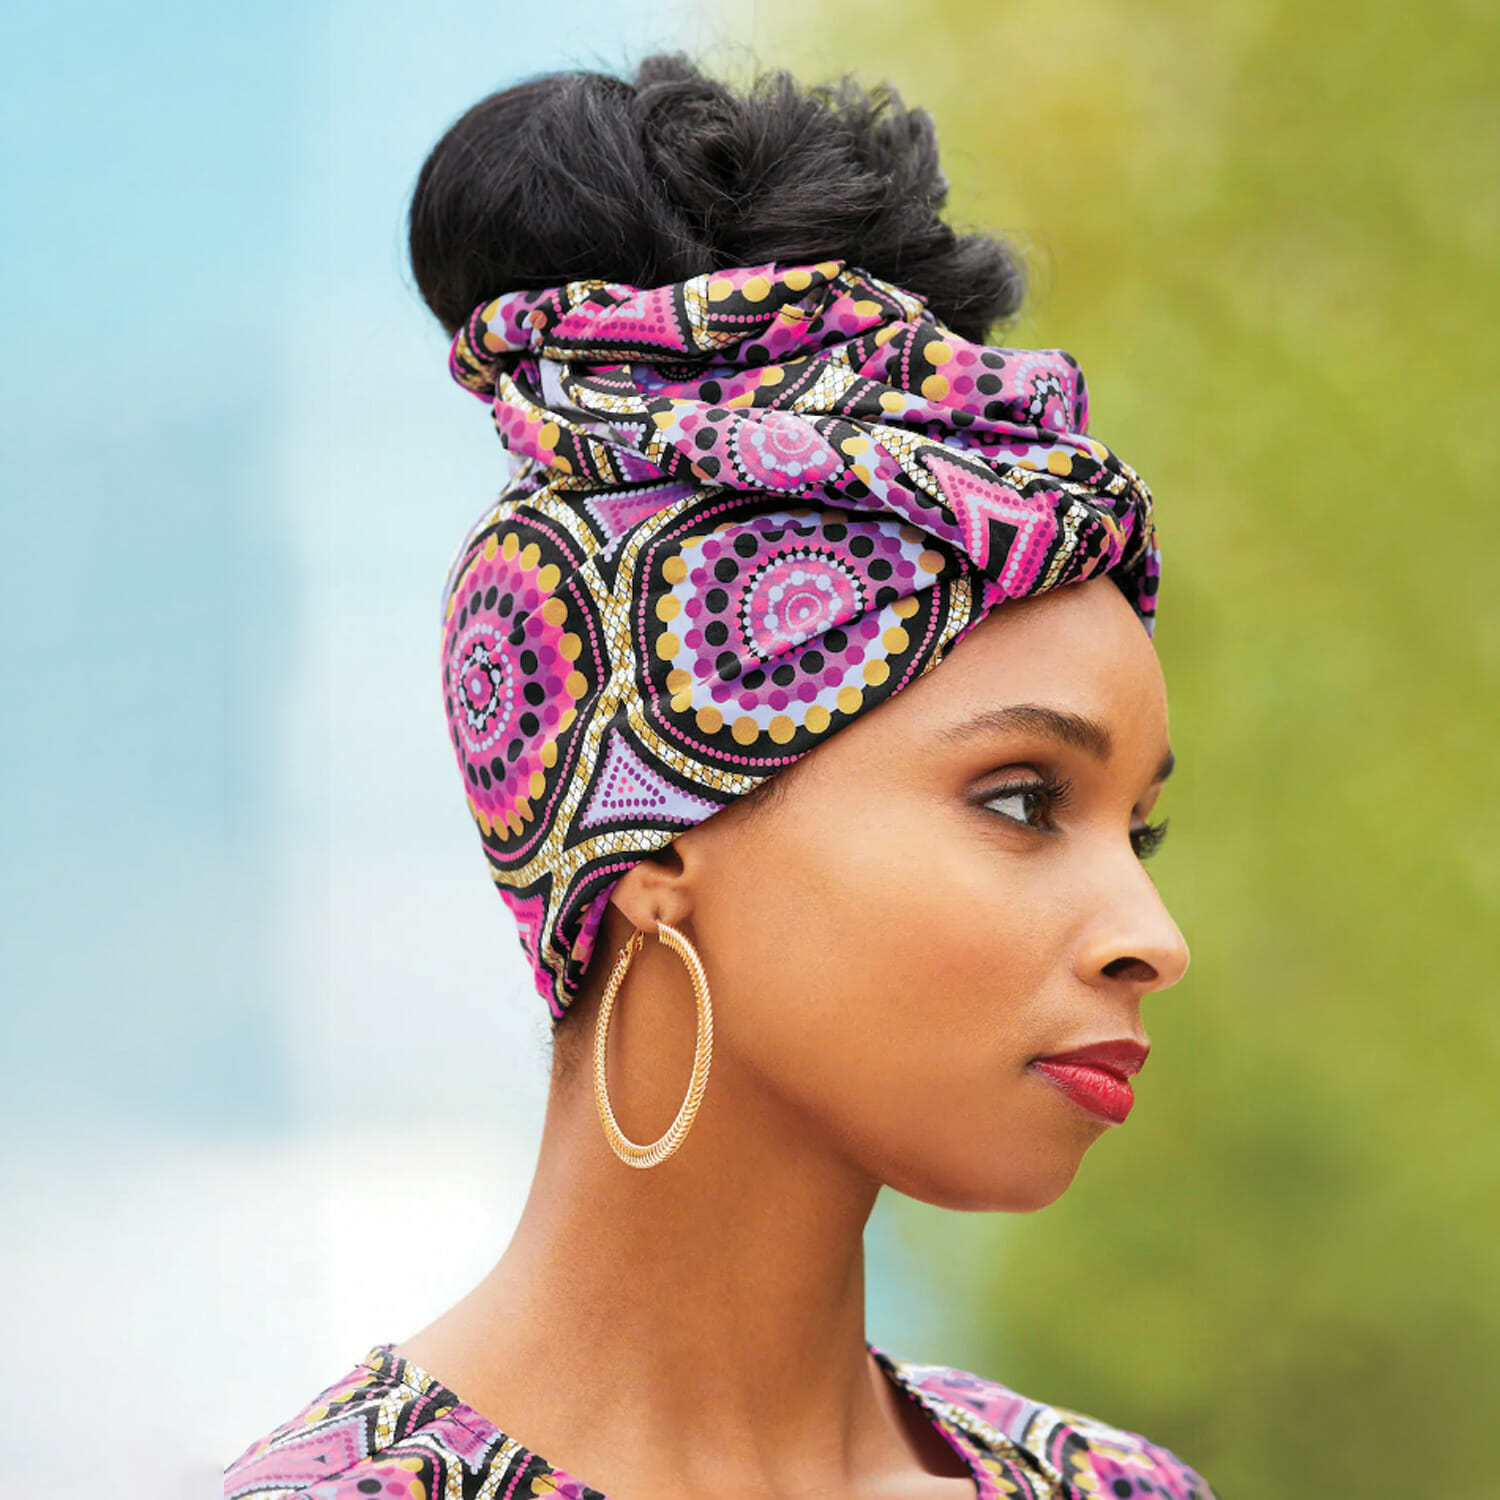 Kamarie Headwrap - Headwrap Styles for Short and Long Hair